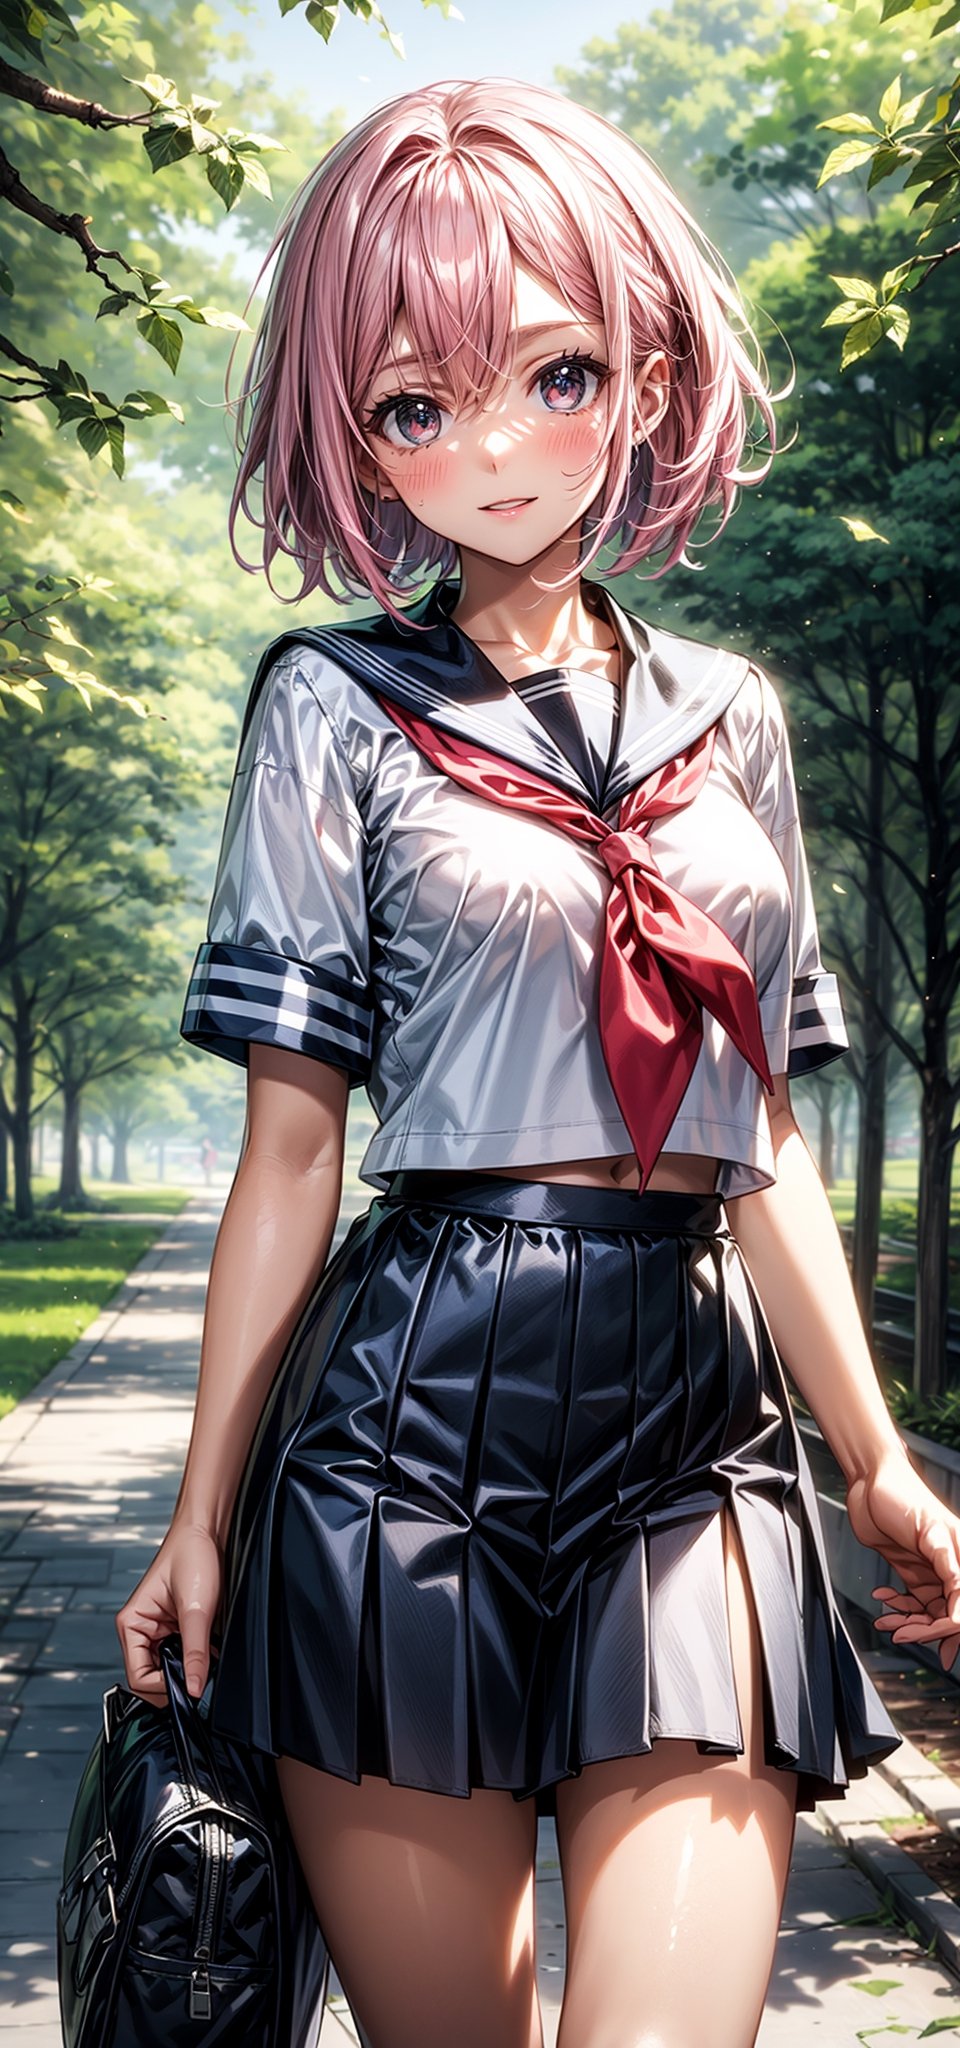 She has short hair, eye-covering bangs, pink hair, a round face, and is dressed in a sailor uniform, with a white top and a blue skirt, exuding youthful energy. She might be standing in a sunny school campus, surrounded by trees and campus buildings. Her expression is innocent and joyful, as if she's a spirited student, ready to face new challenges and friendships. Her sailor outfit represents carefree youthful days.